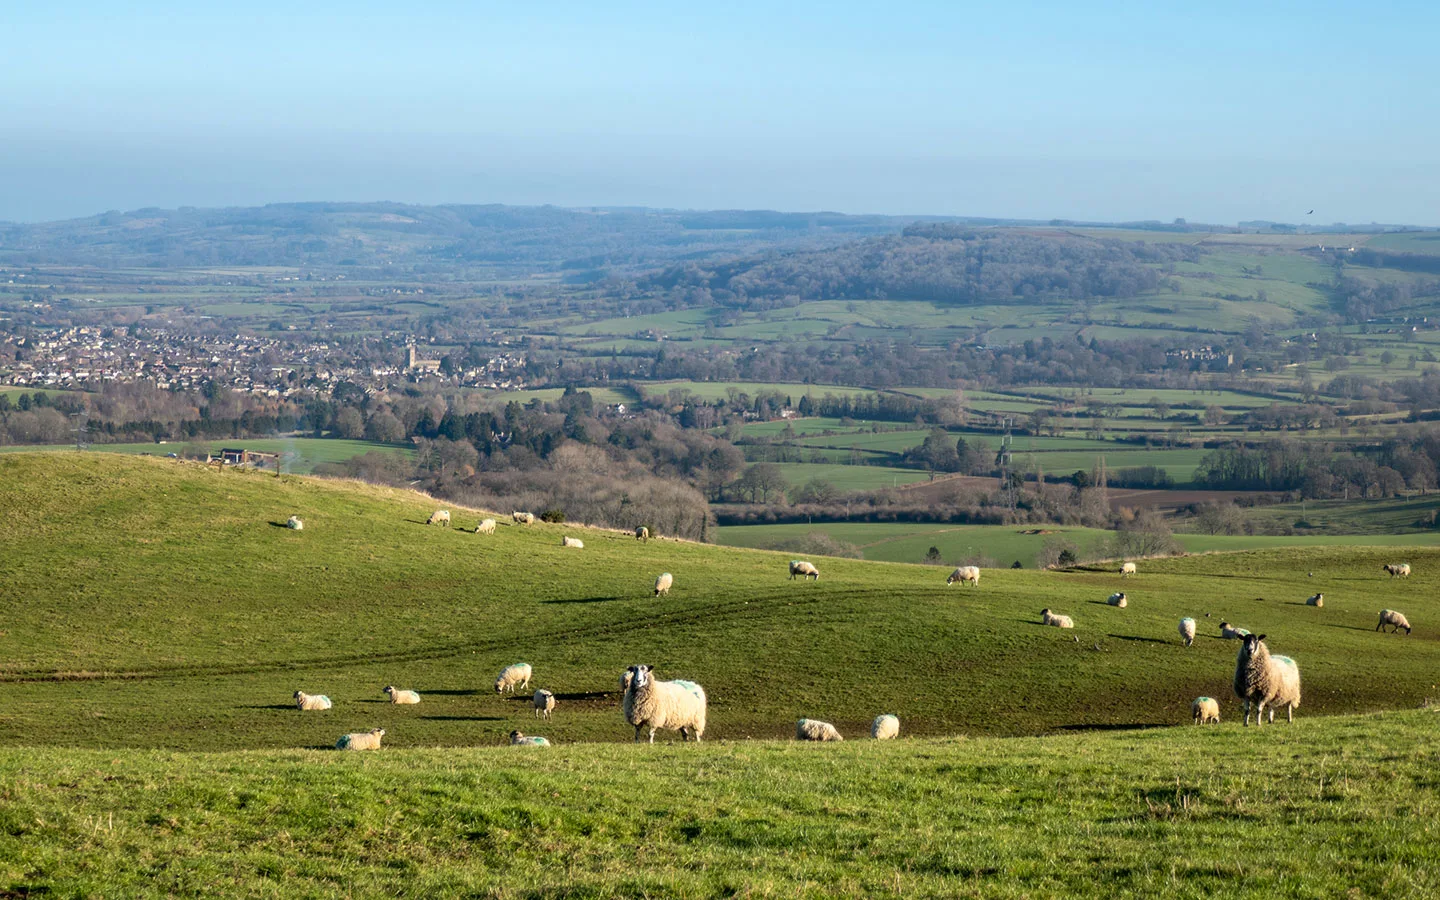 Looking down on Winchcombe